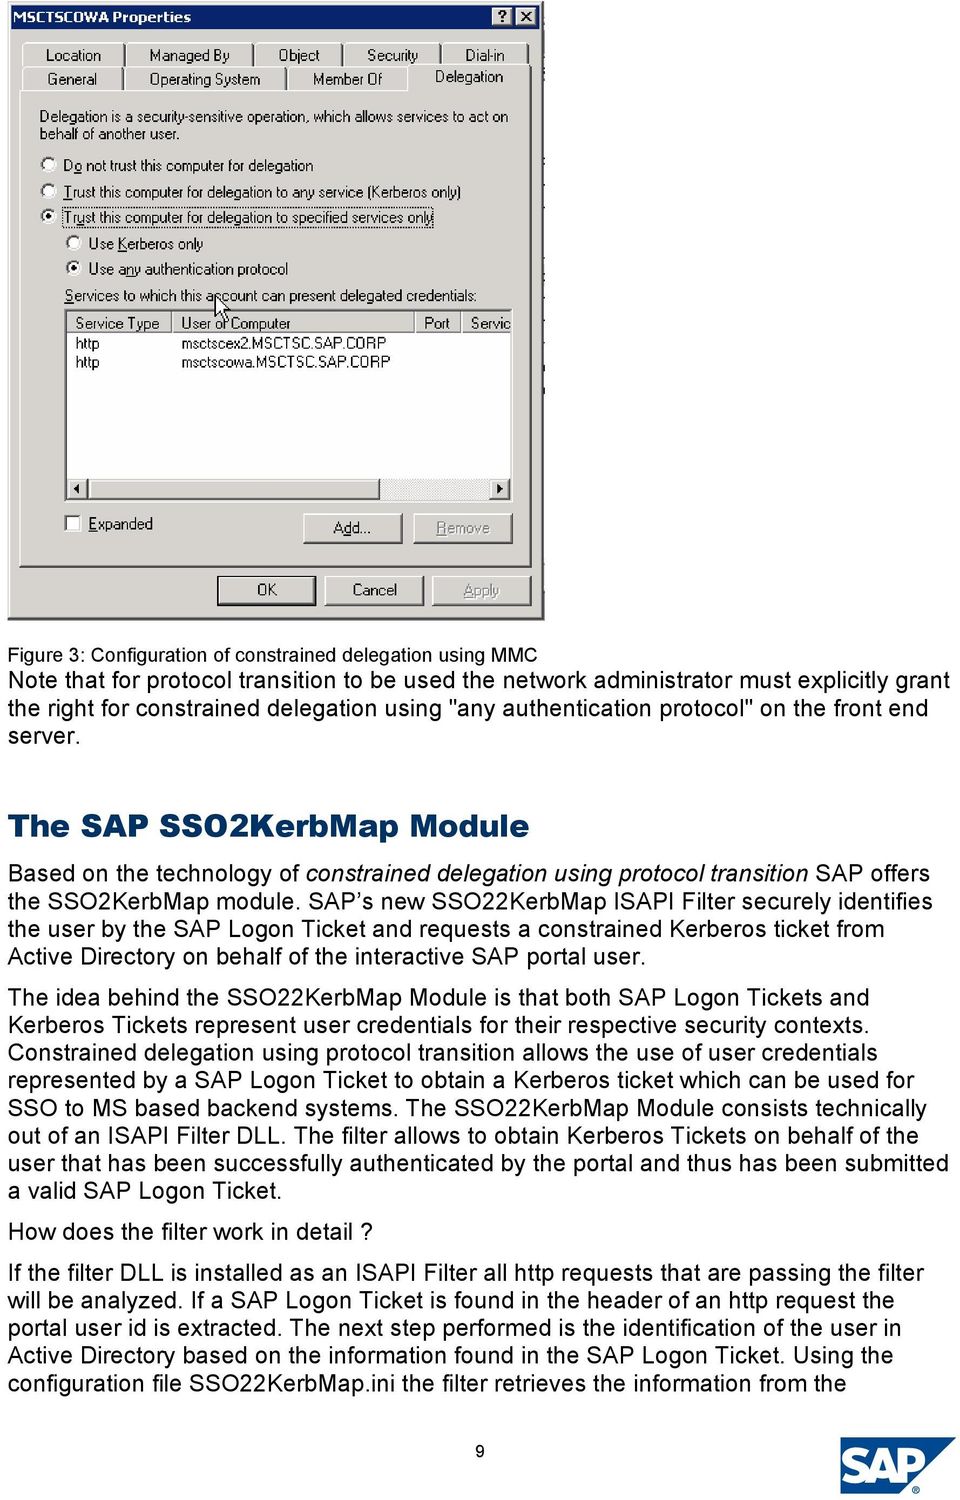 SAP s new SSO22KerbMap ISAPI Filter securely identifies the user by the SAP Logon Ticket and requests a constrained Kerberos ticket from Active Directory on behalf of the interactive SAP portal user.